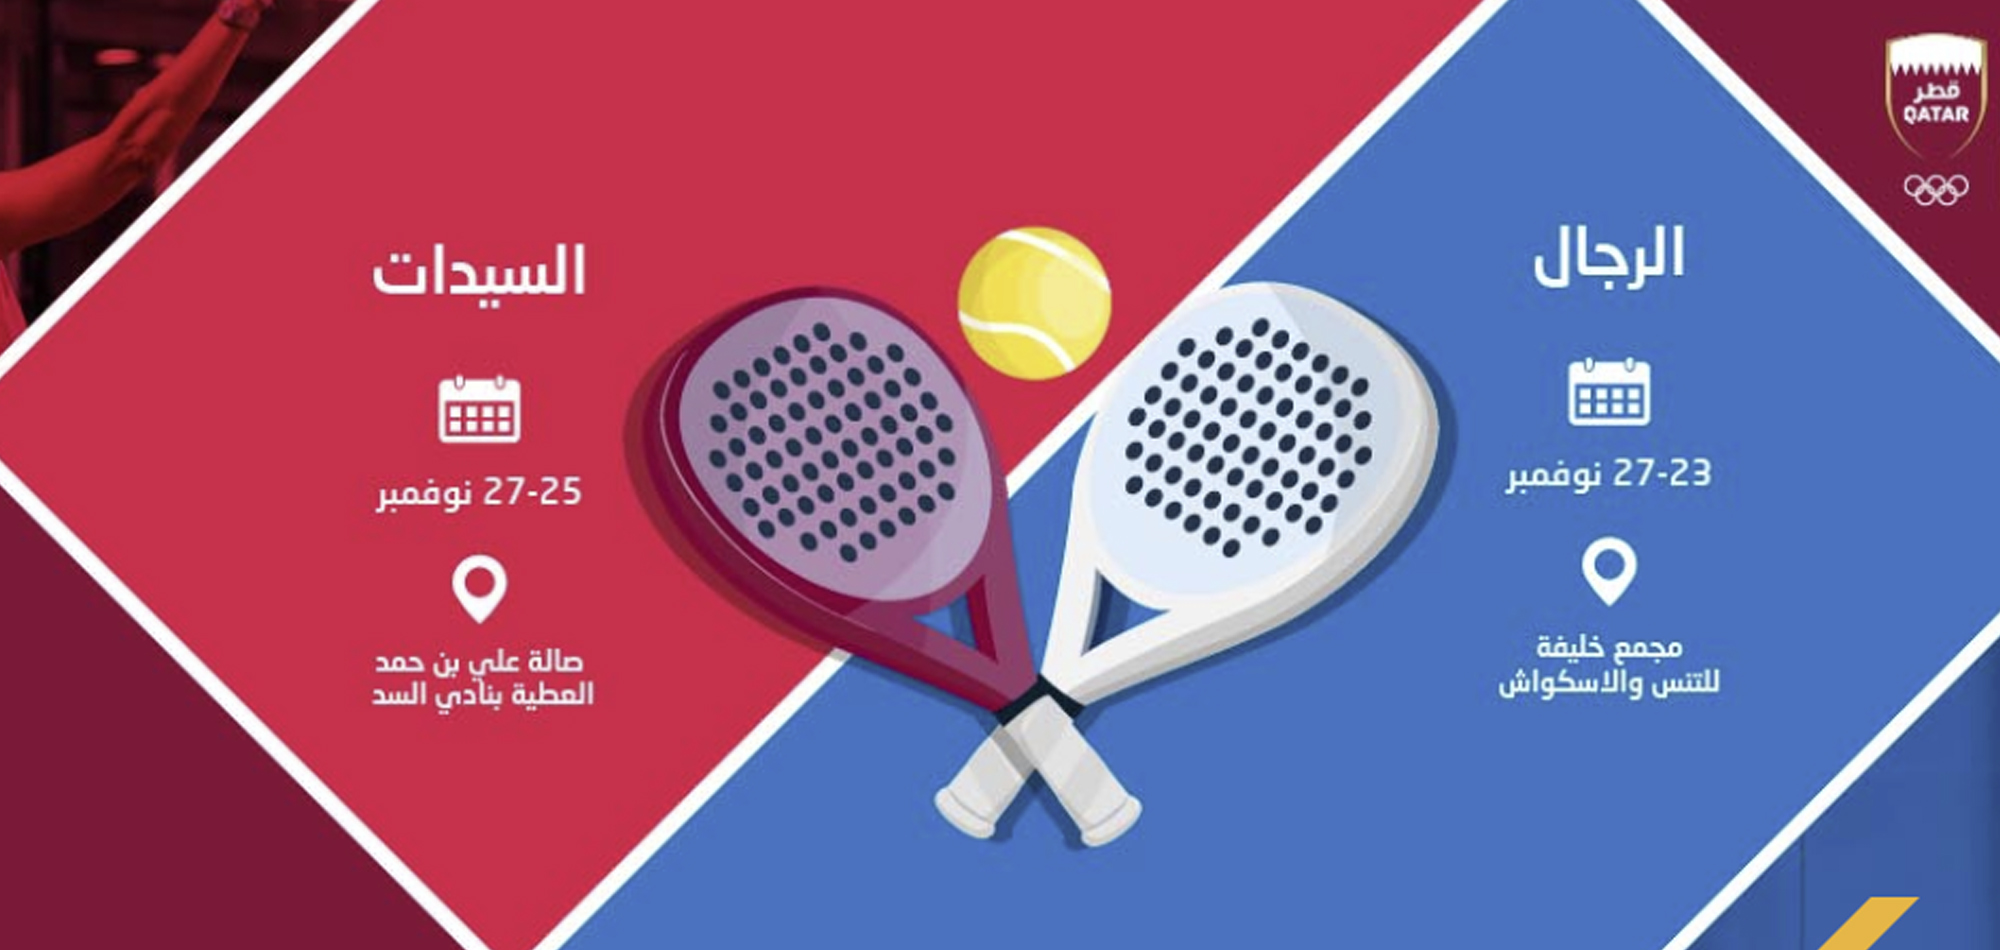 QOC Padel Tournament 2021 by ooredoo to begin on Tuesday